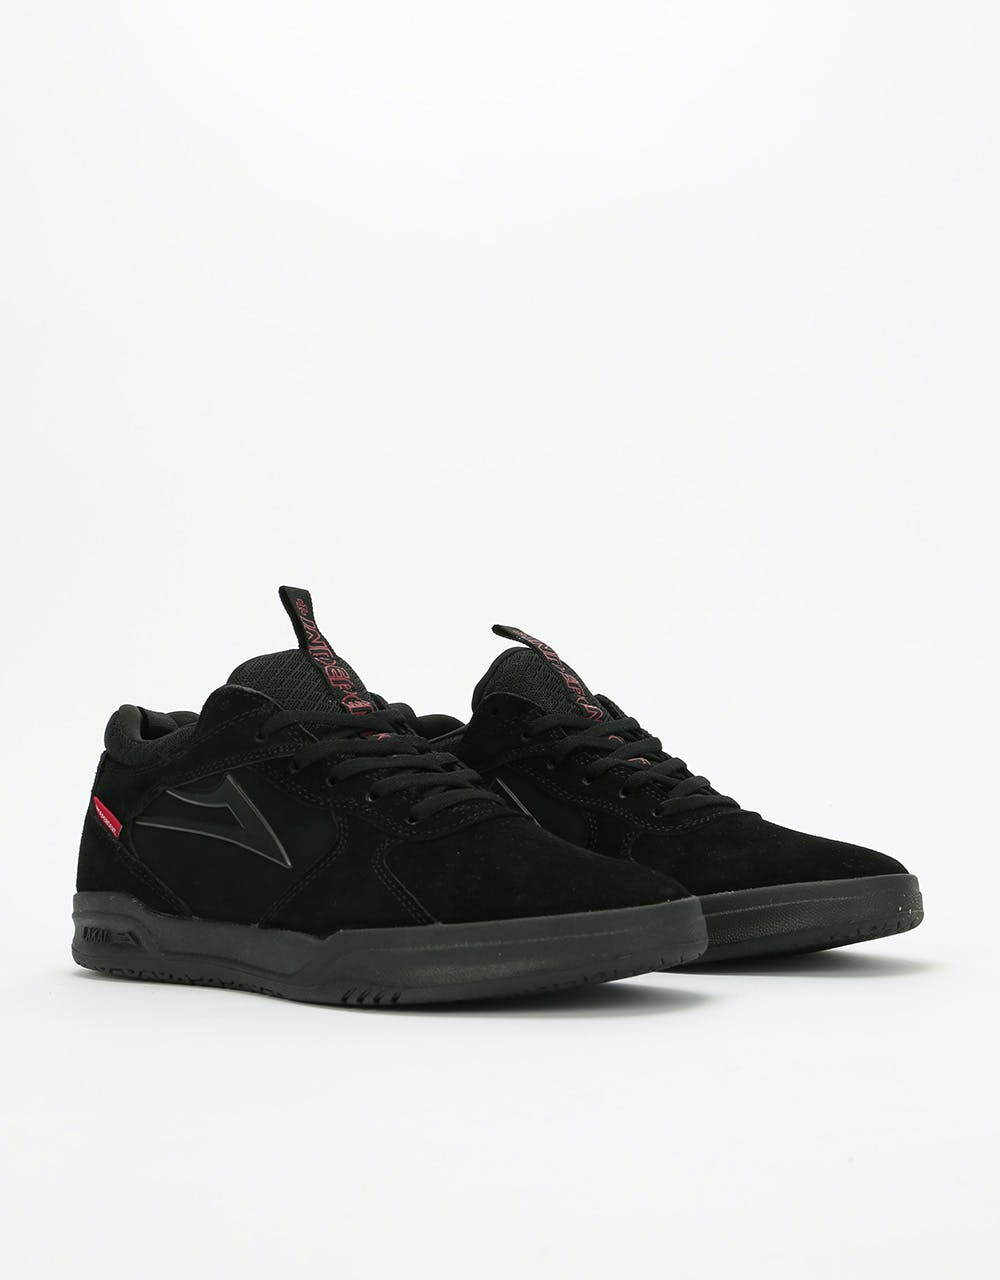 Lakai x Independent Proto Skate Shoes - Black Suede